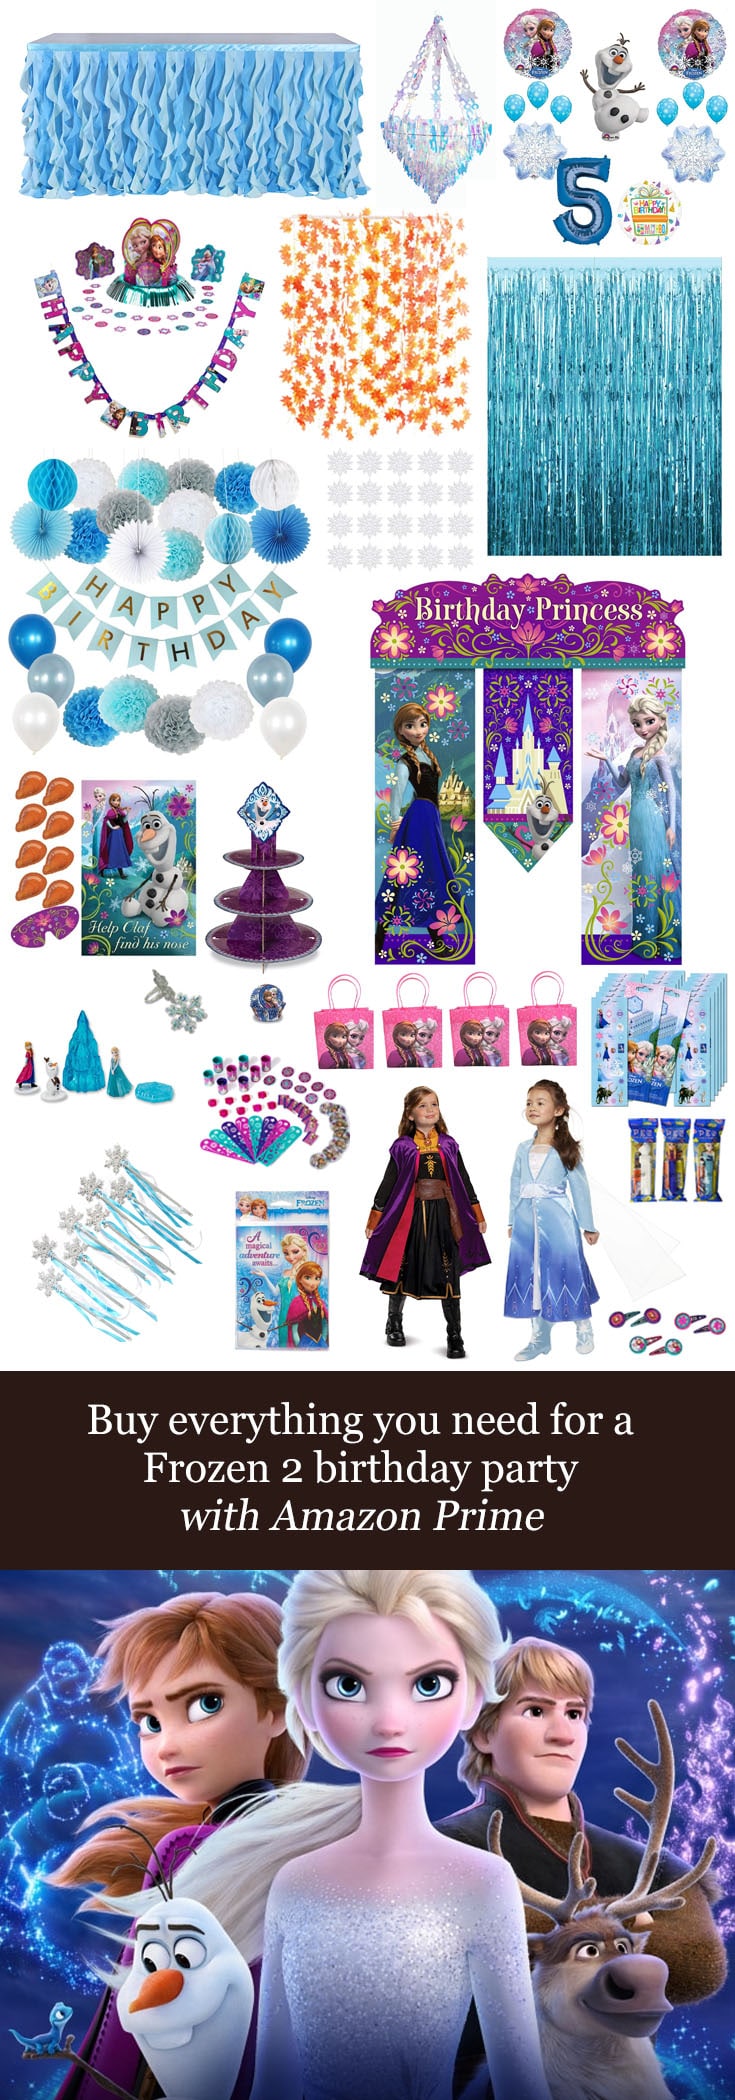 Texas Mom Blogger, Kiss My Tulle, shares how you can buy everything you need for a #Disney #Frozen2 birthday party with Amazon Prime!